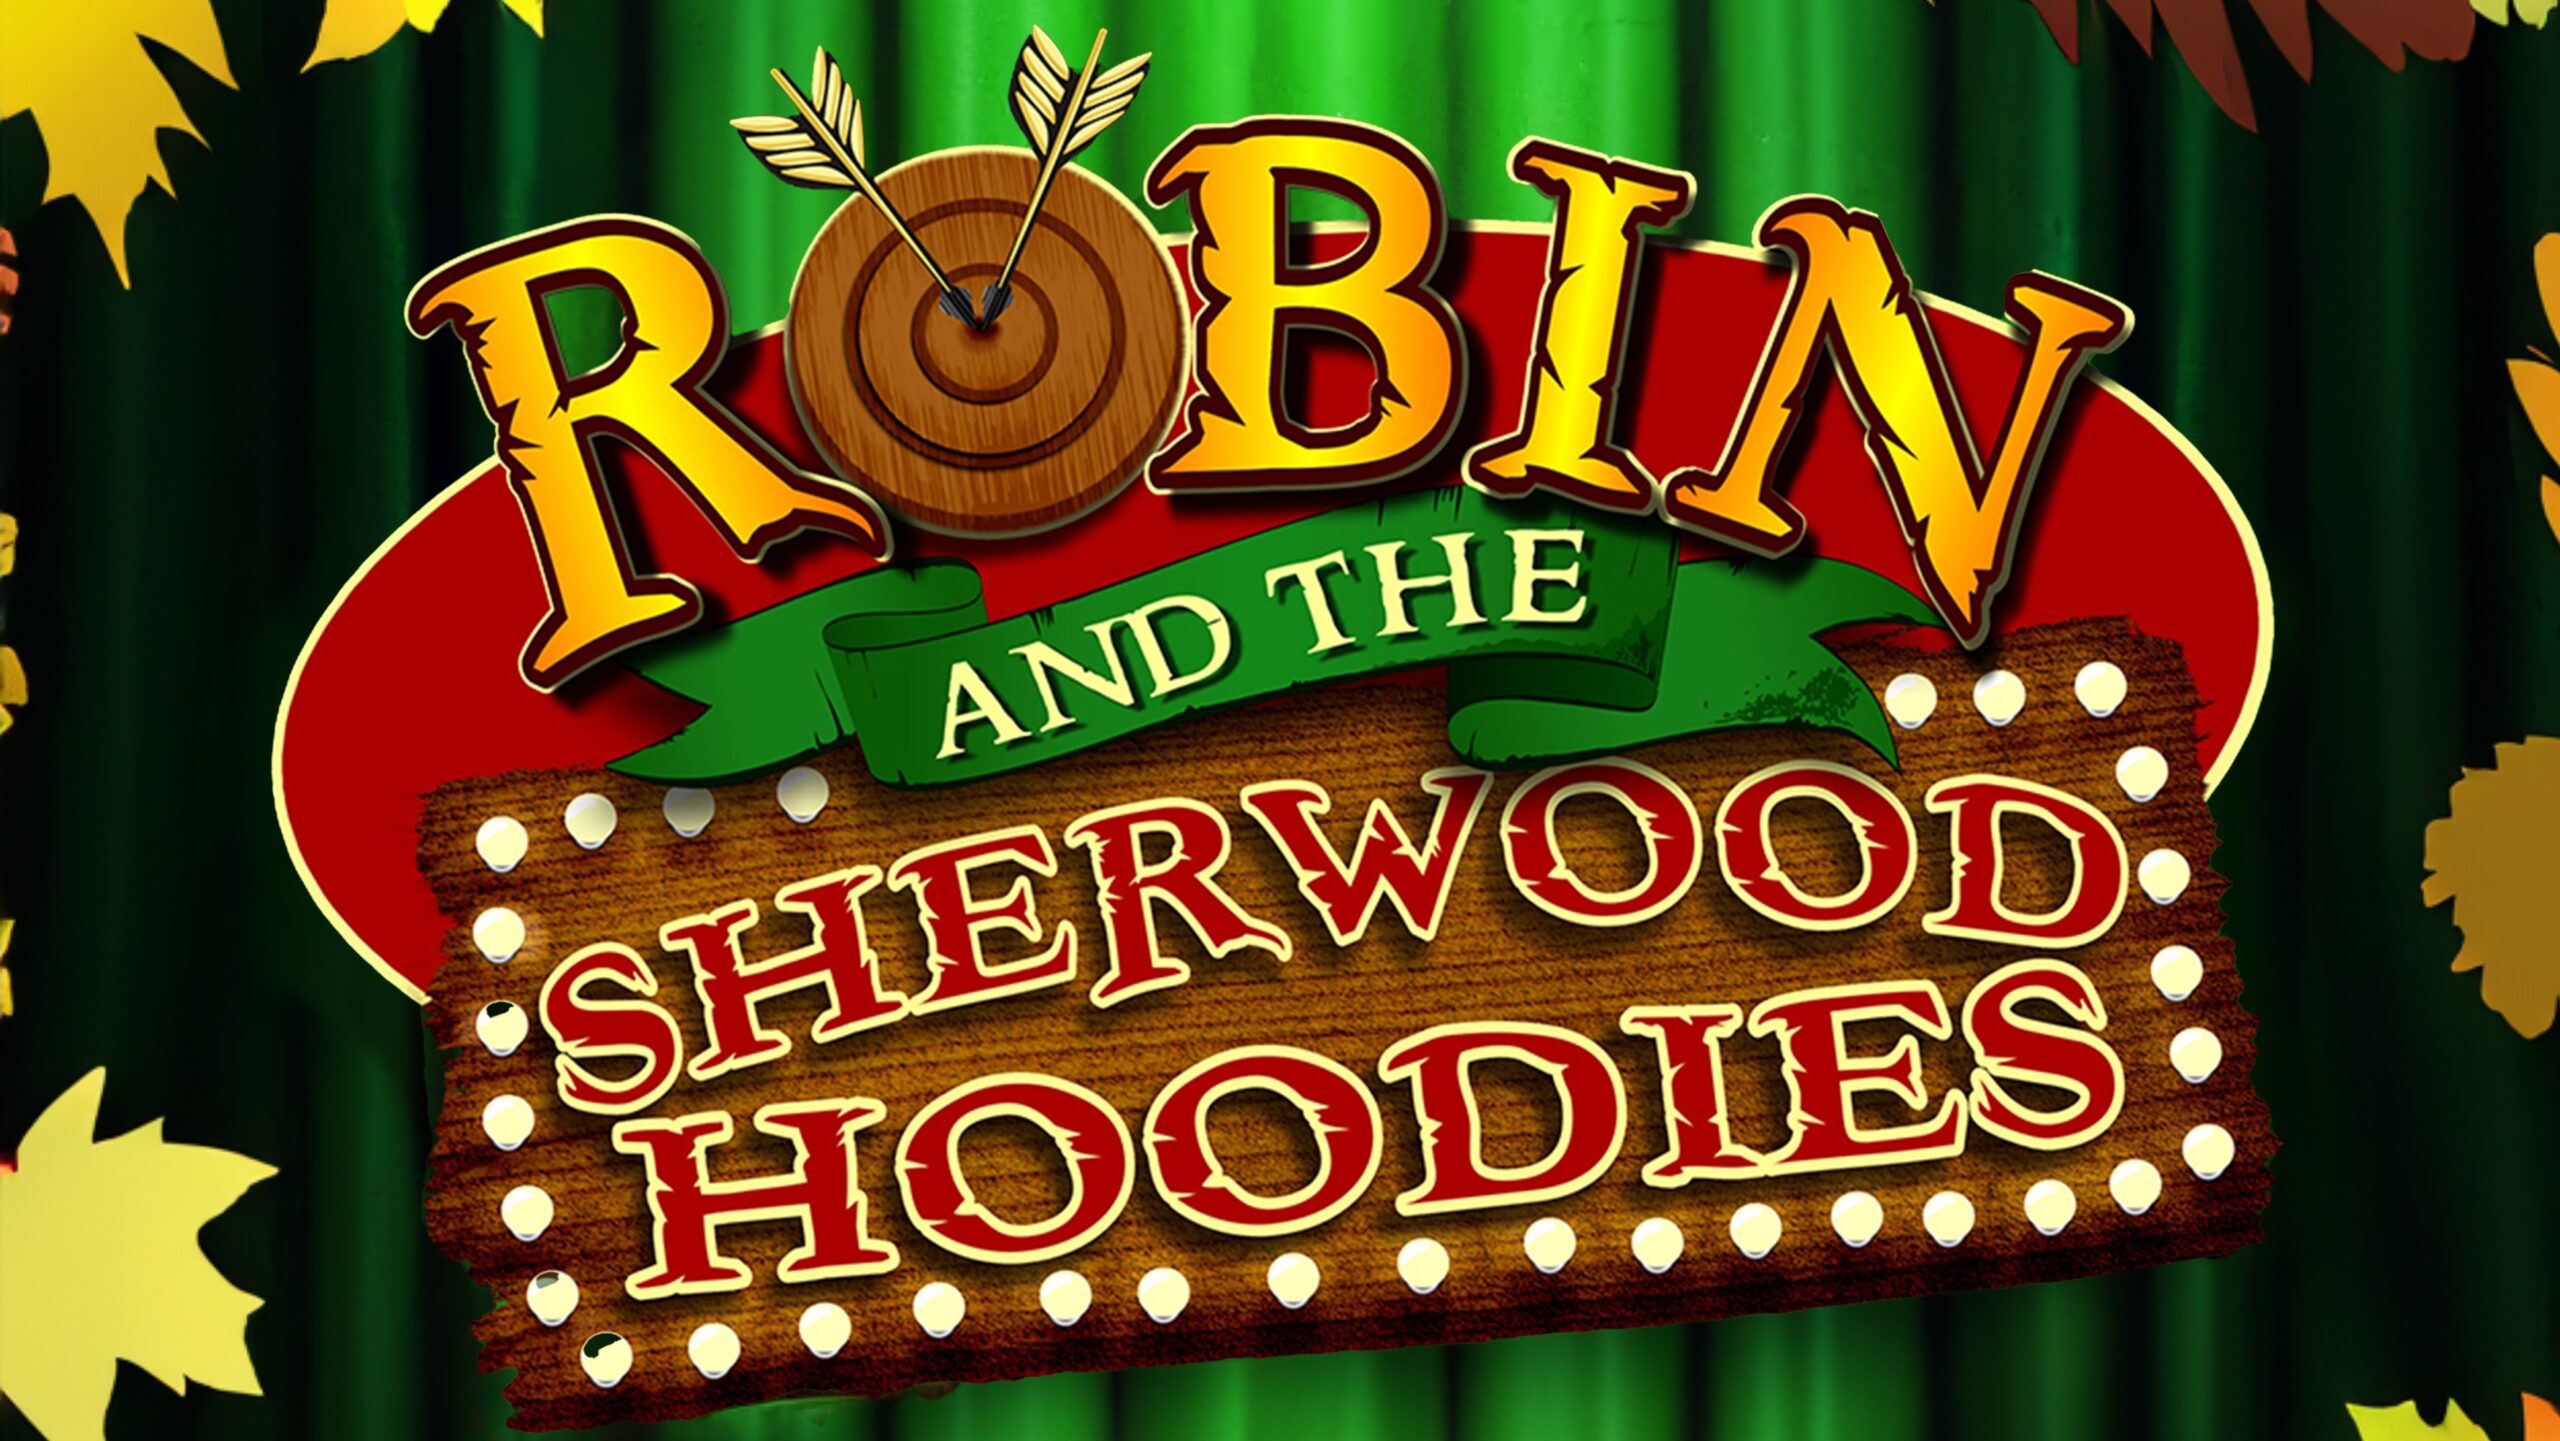 Robin and Hoodies Musical poster landscape